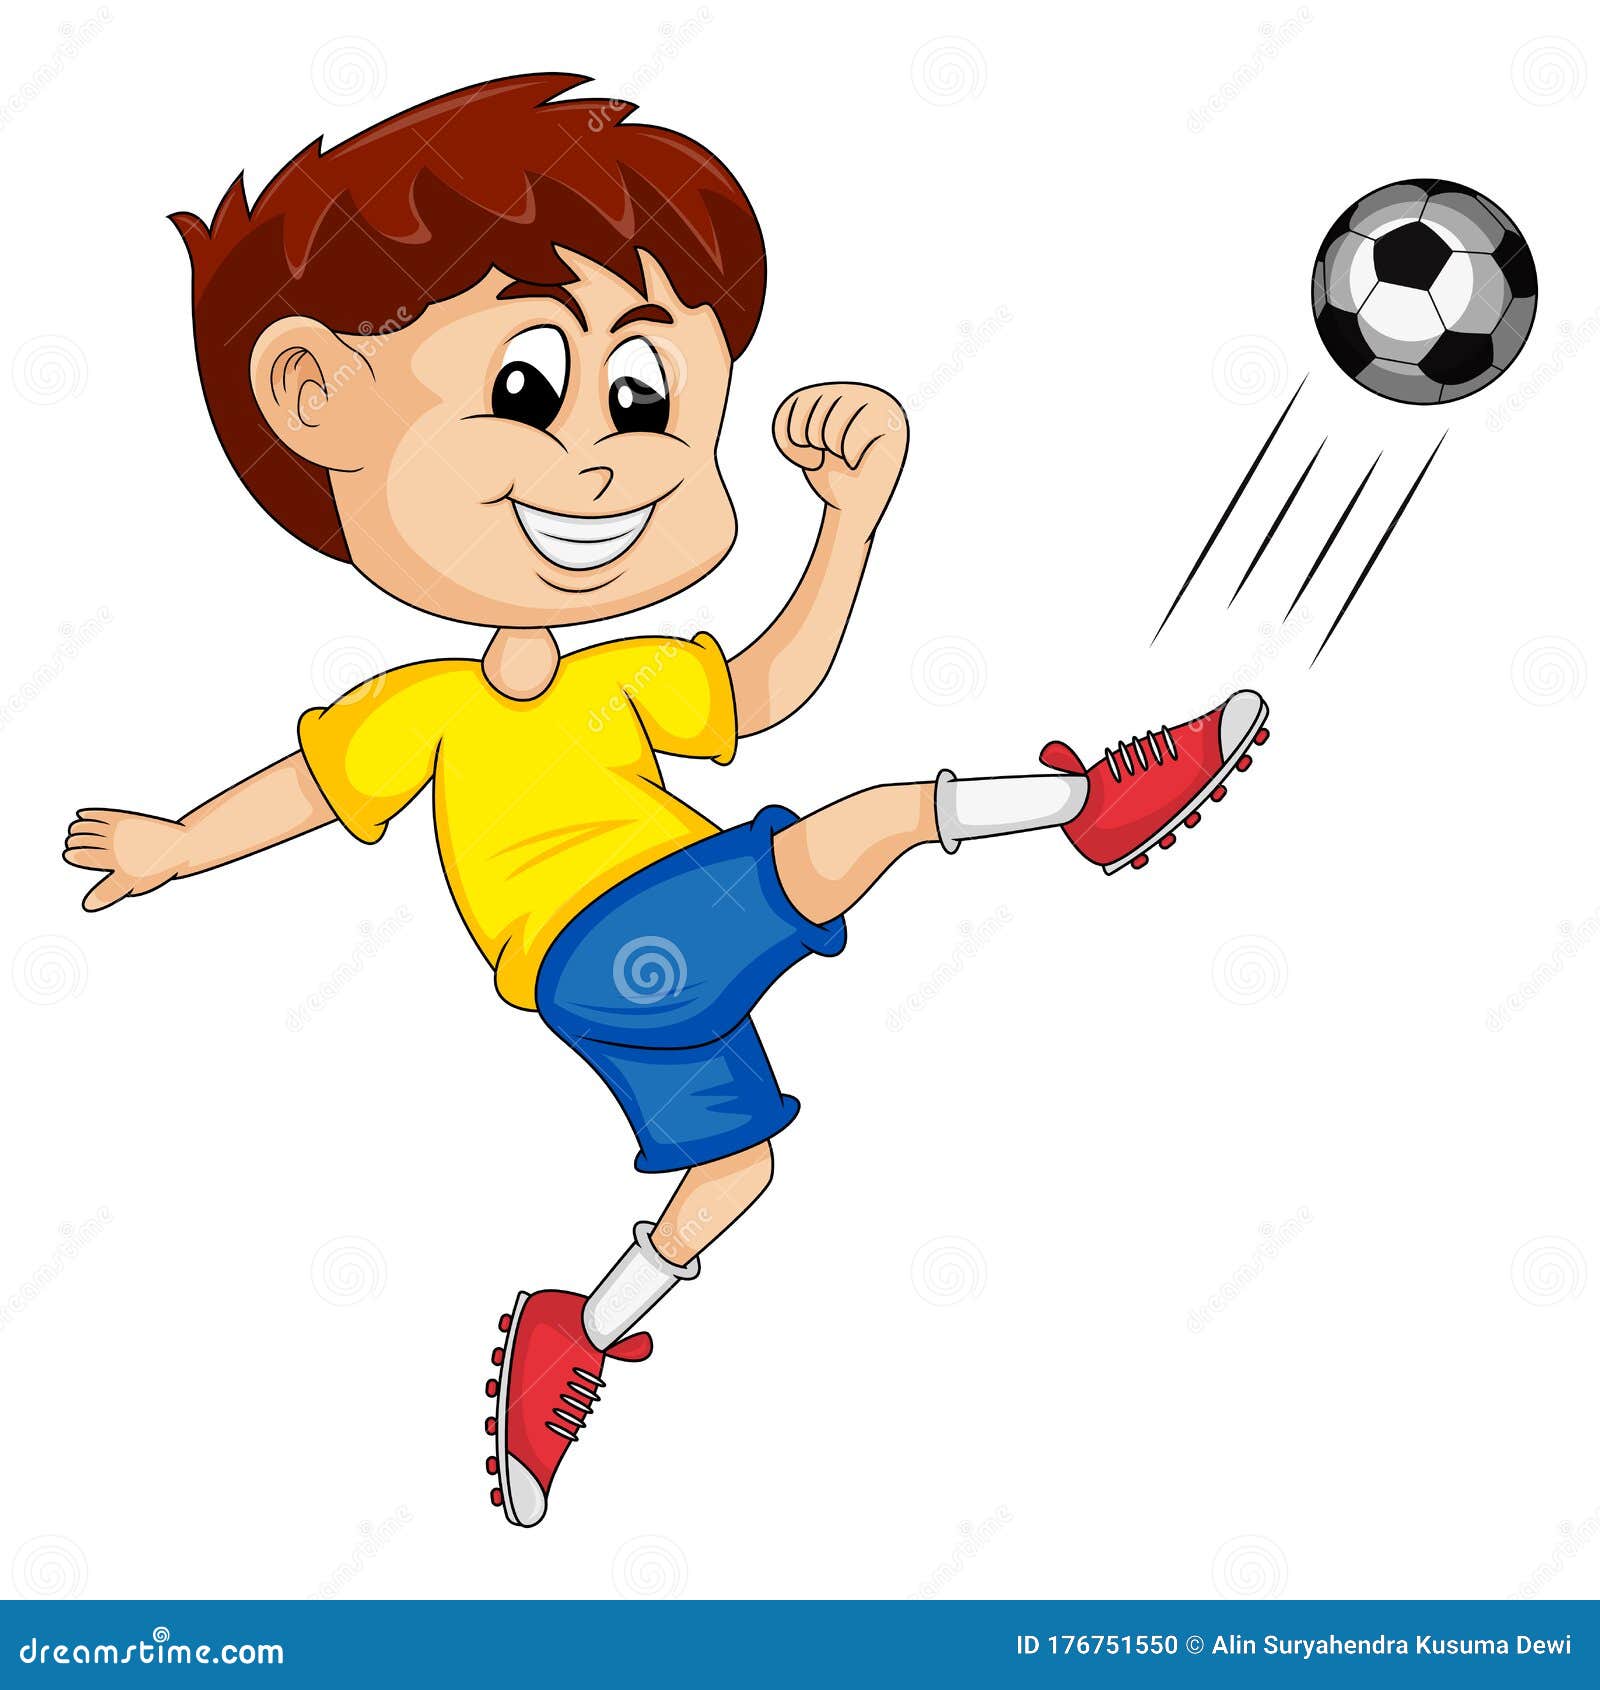 Download A Boy Playing Soccer Cartoon Vector Illustration Stock ...